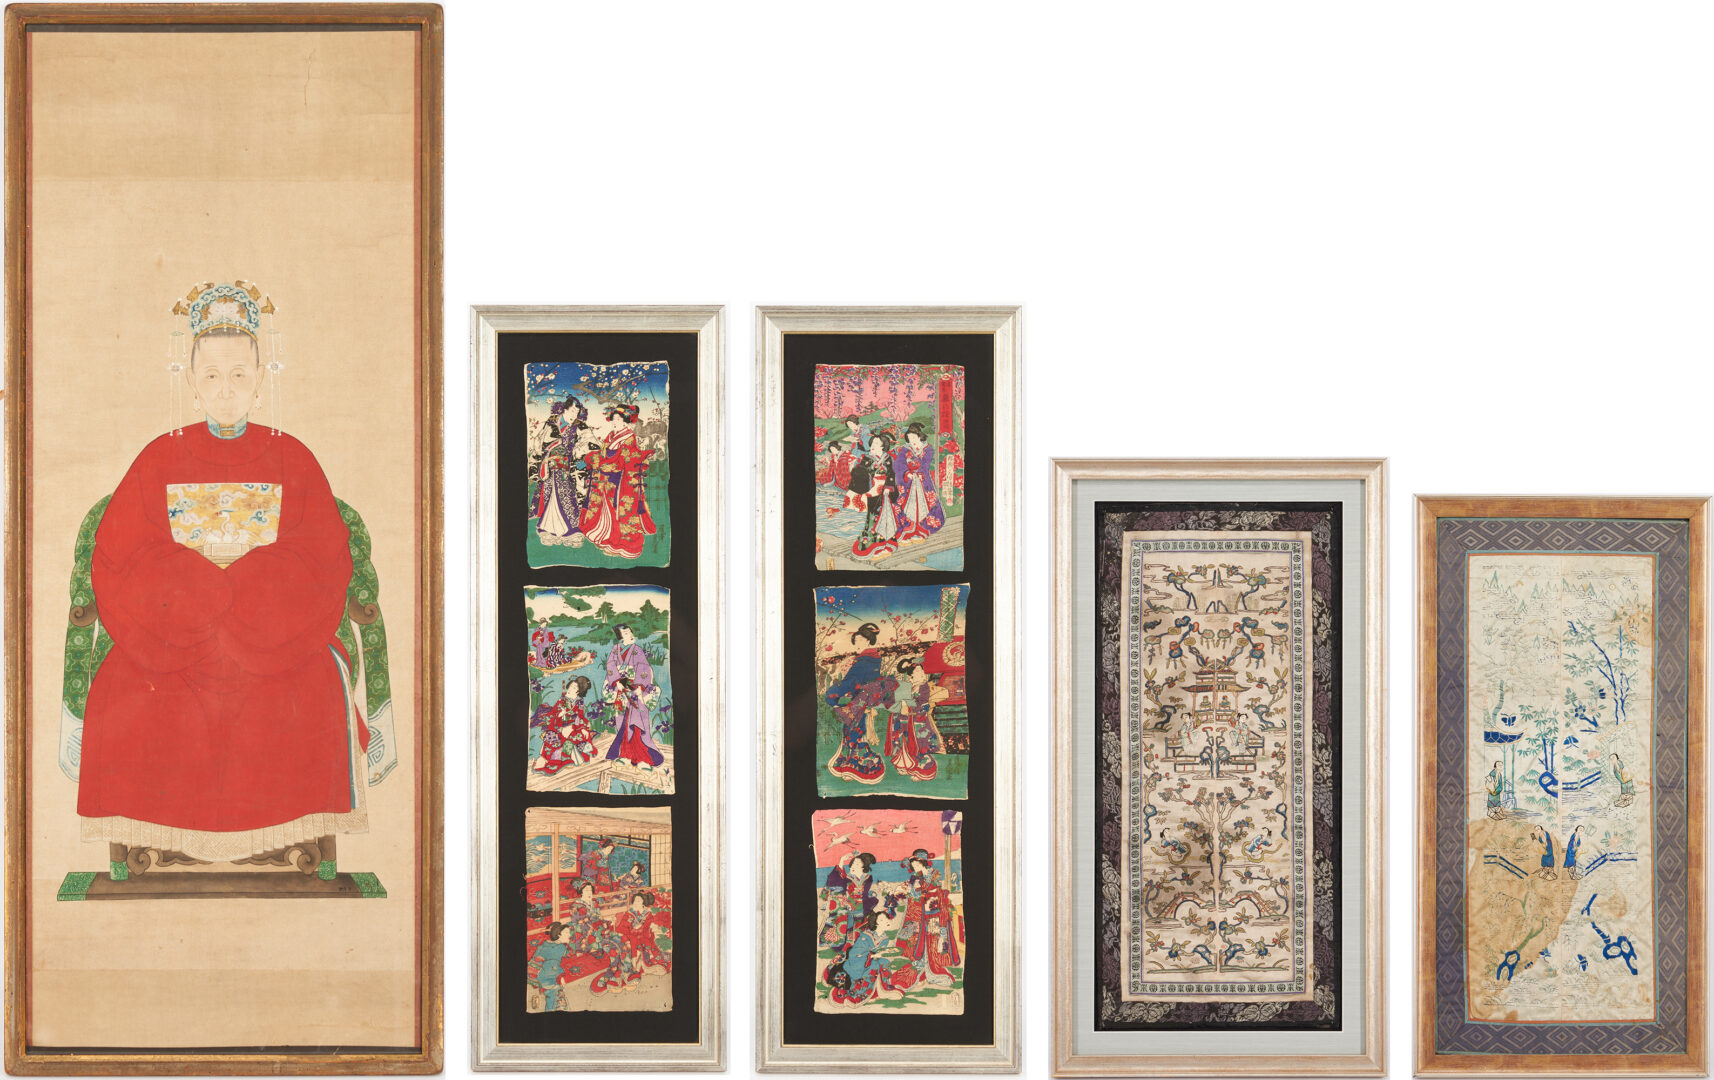 Lot 407: 5 Asian Framed Items, Ancestor Portrait, Japanese Textile Prints, Chinese Embroideries